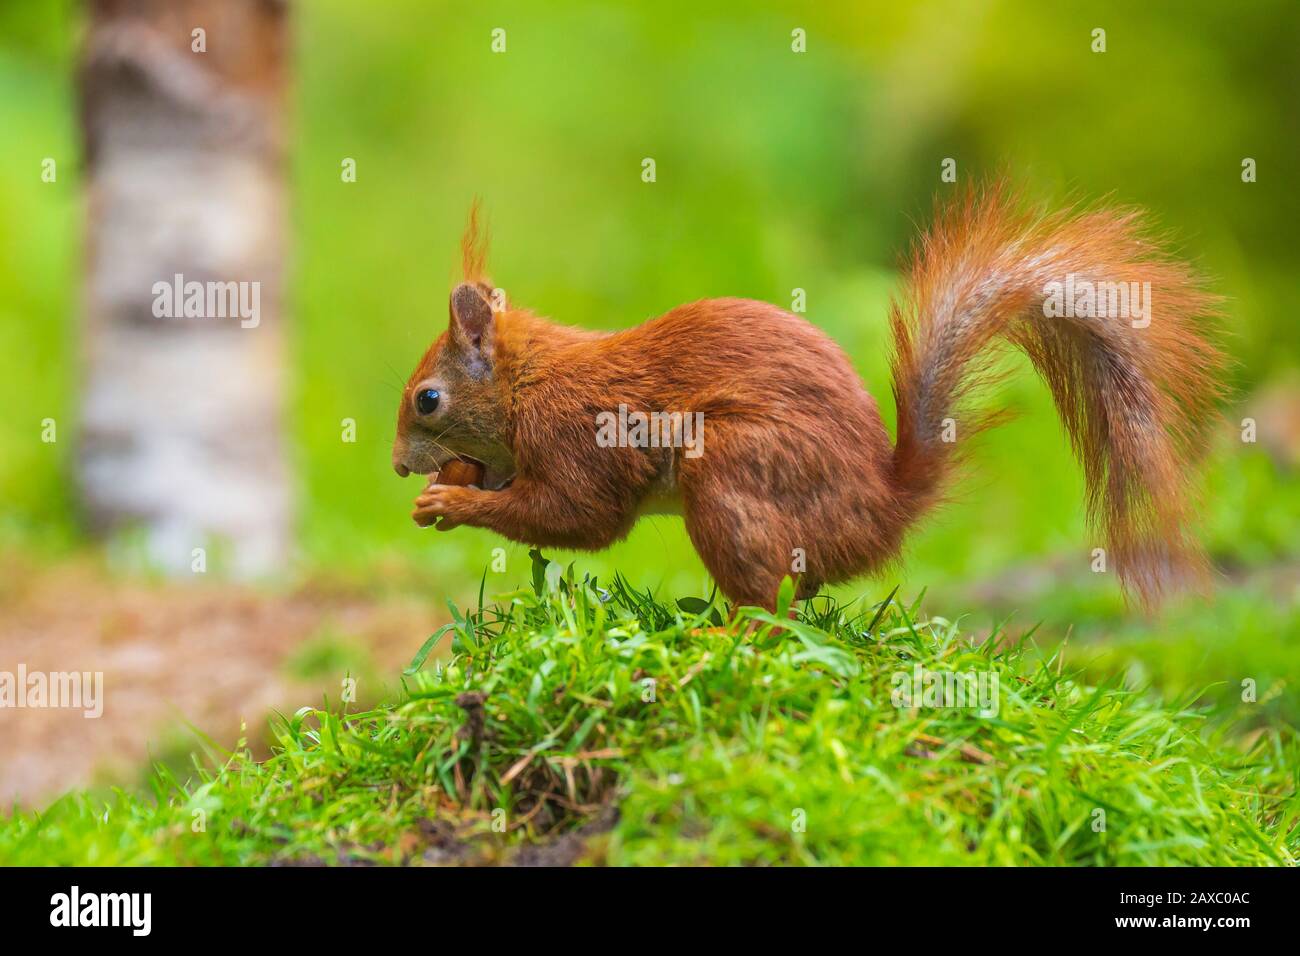 Closeup of a Eurasian red squirrel, Sciurus vulgaris, searching food and eating nuts in a forest. Selective focus, natural sunlight, wild animal. Stock Photo